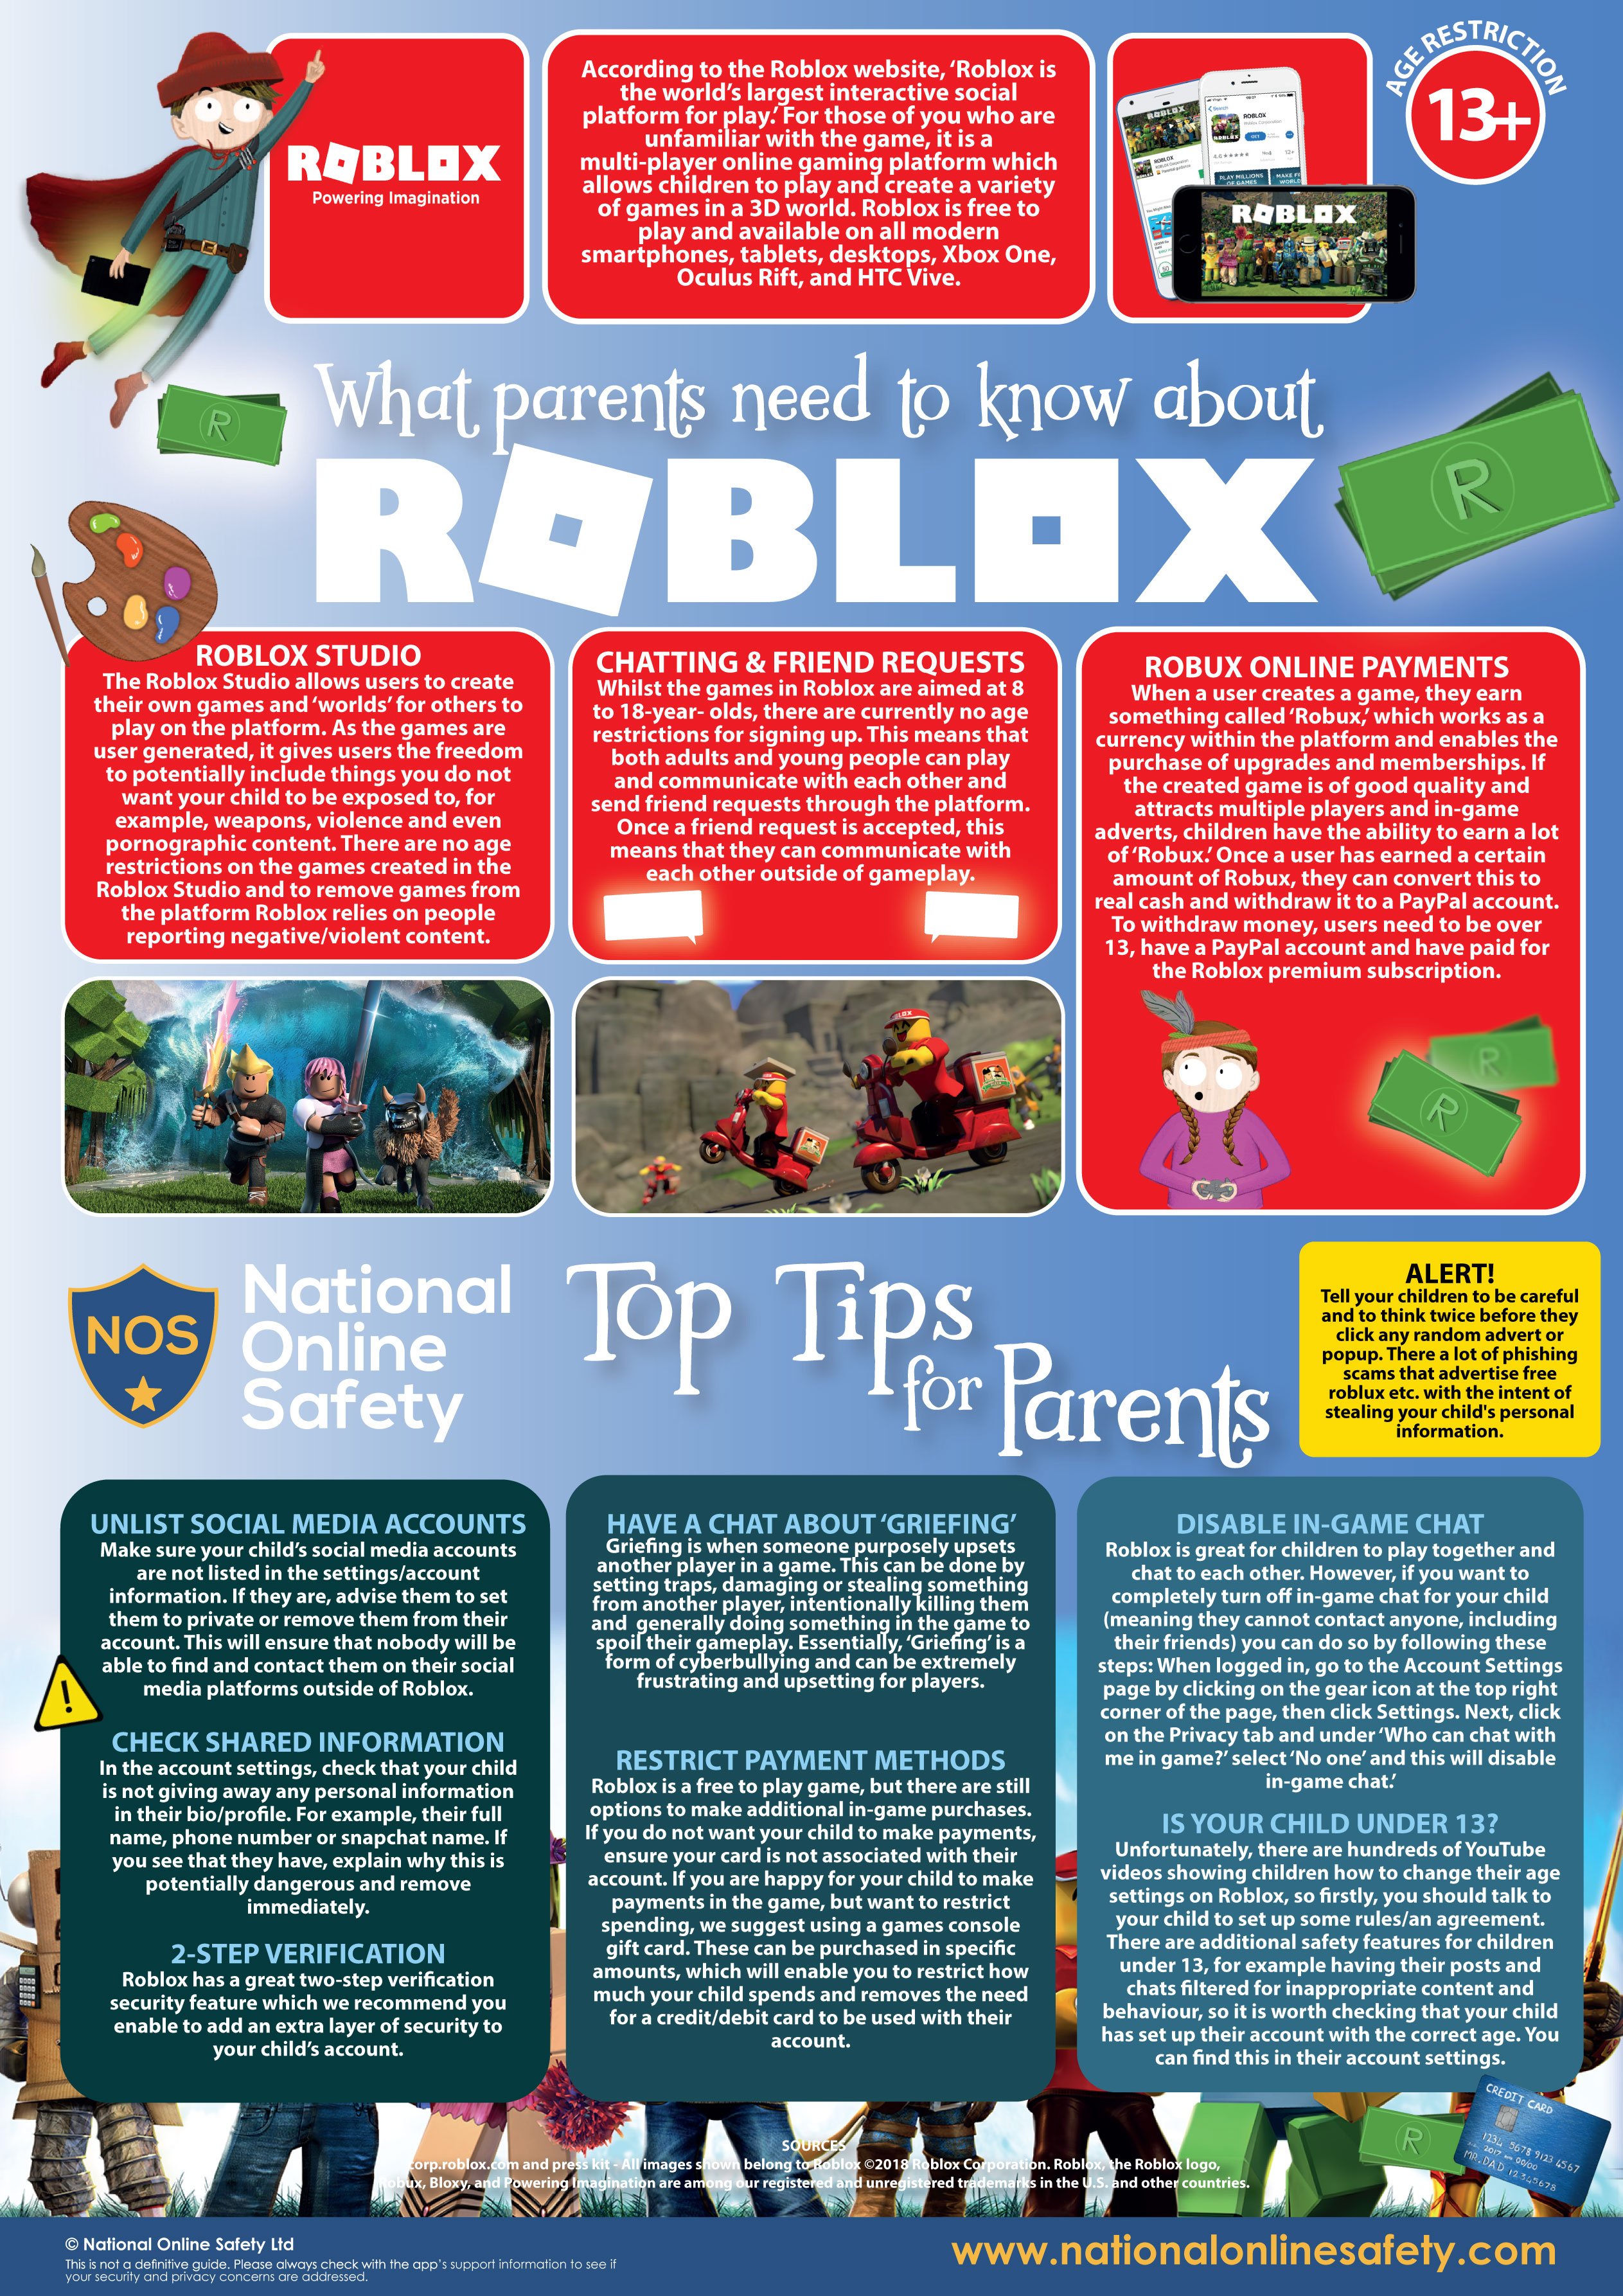 Cherry Tree Hill On Twitter Is Your Child Playing Roblox Here Are Some Helpful Tips To Keep Your Child Safe Online Https T Co Uowh2dfy9v Twitter - roblox online free no sign up